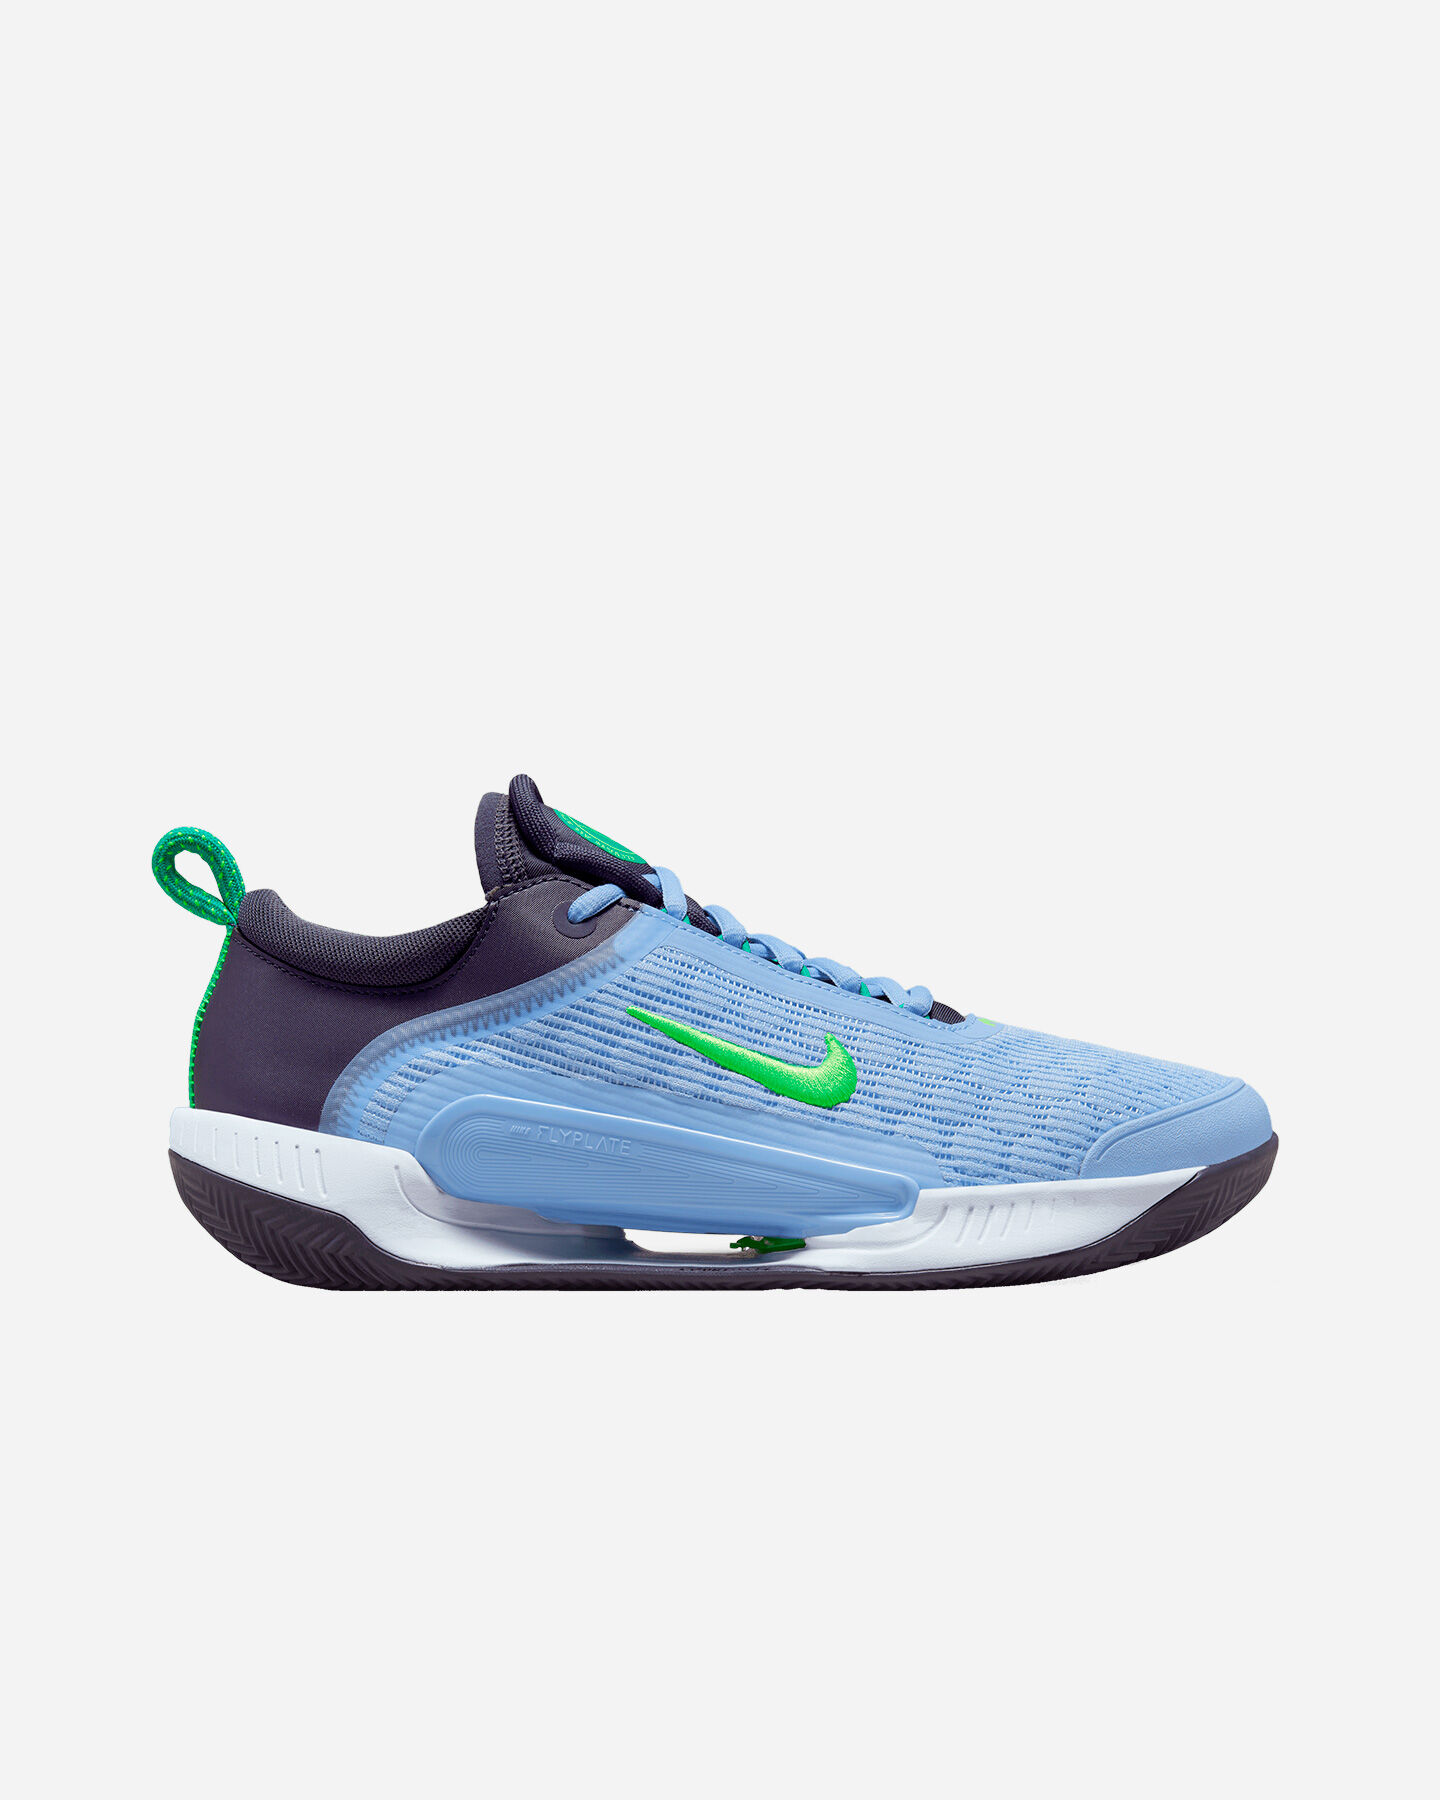  Scarpe tennis NIKE ZOOM COURT NXT CLAY M S5561404|400|11 scatto 0